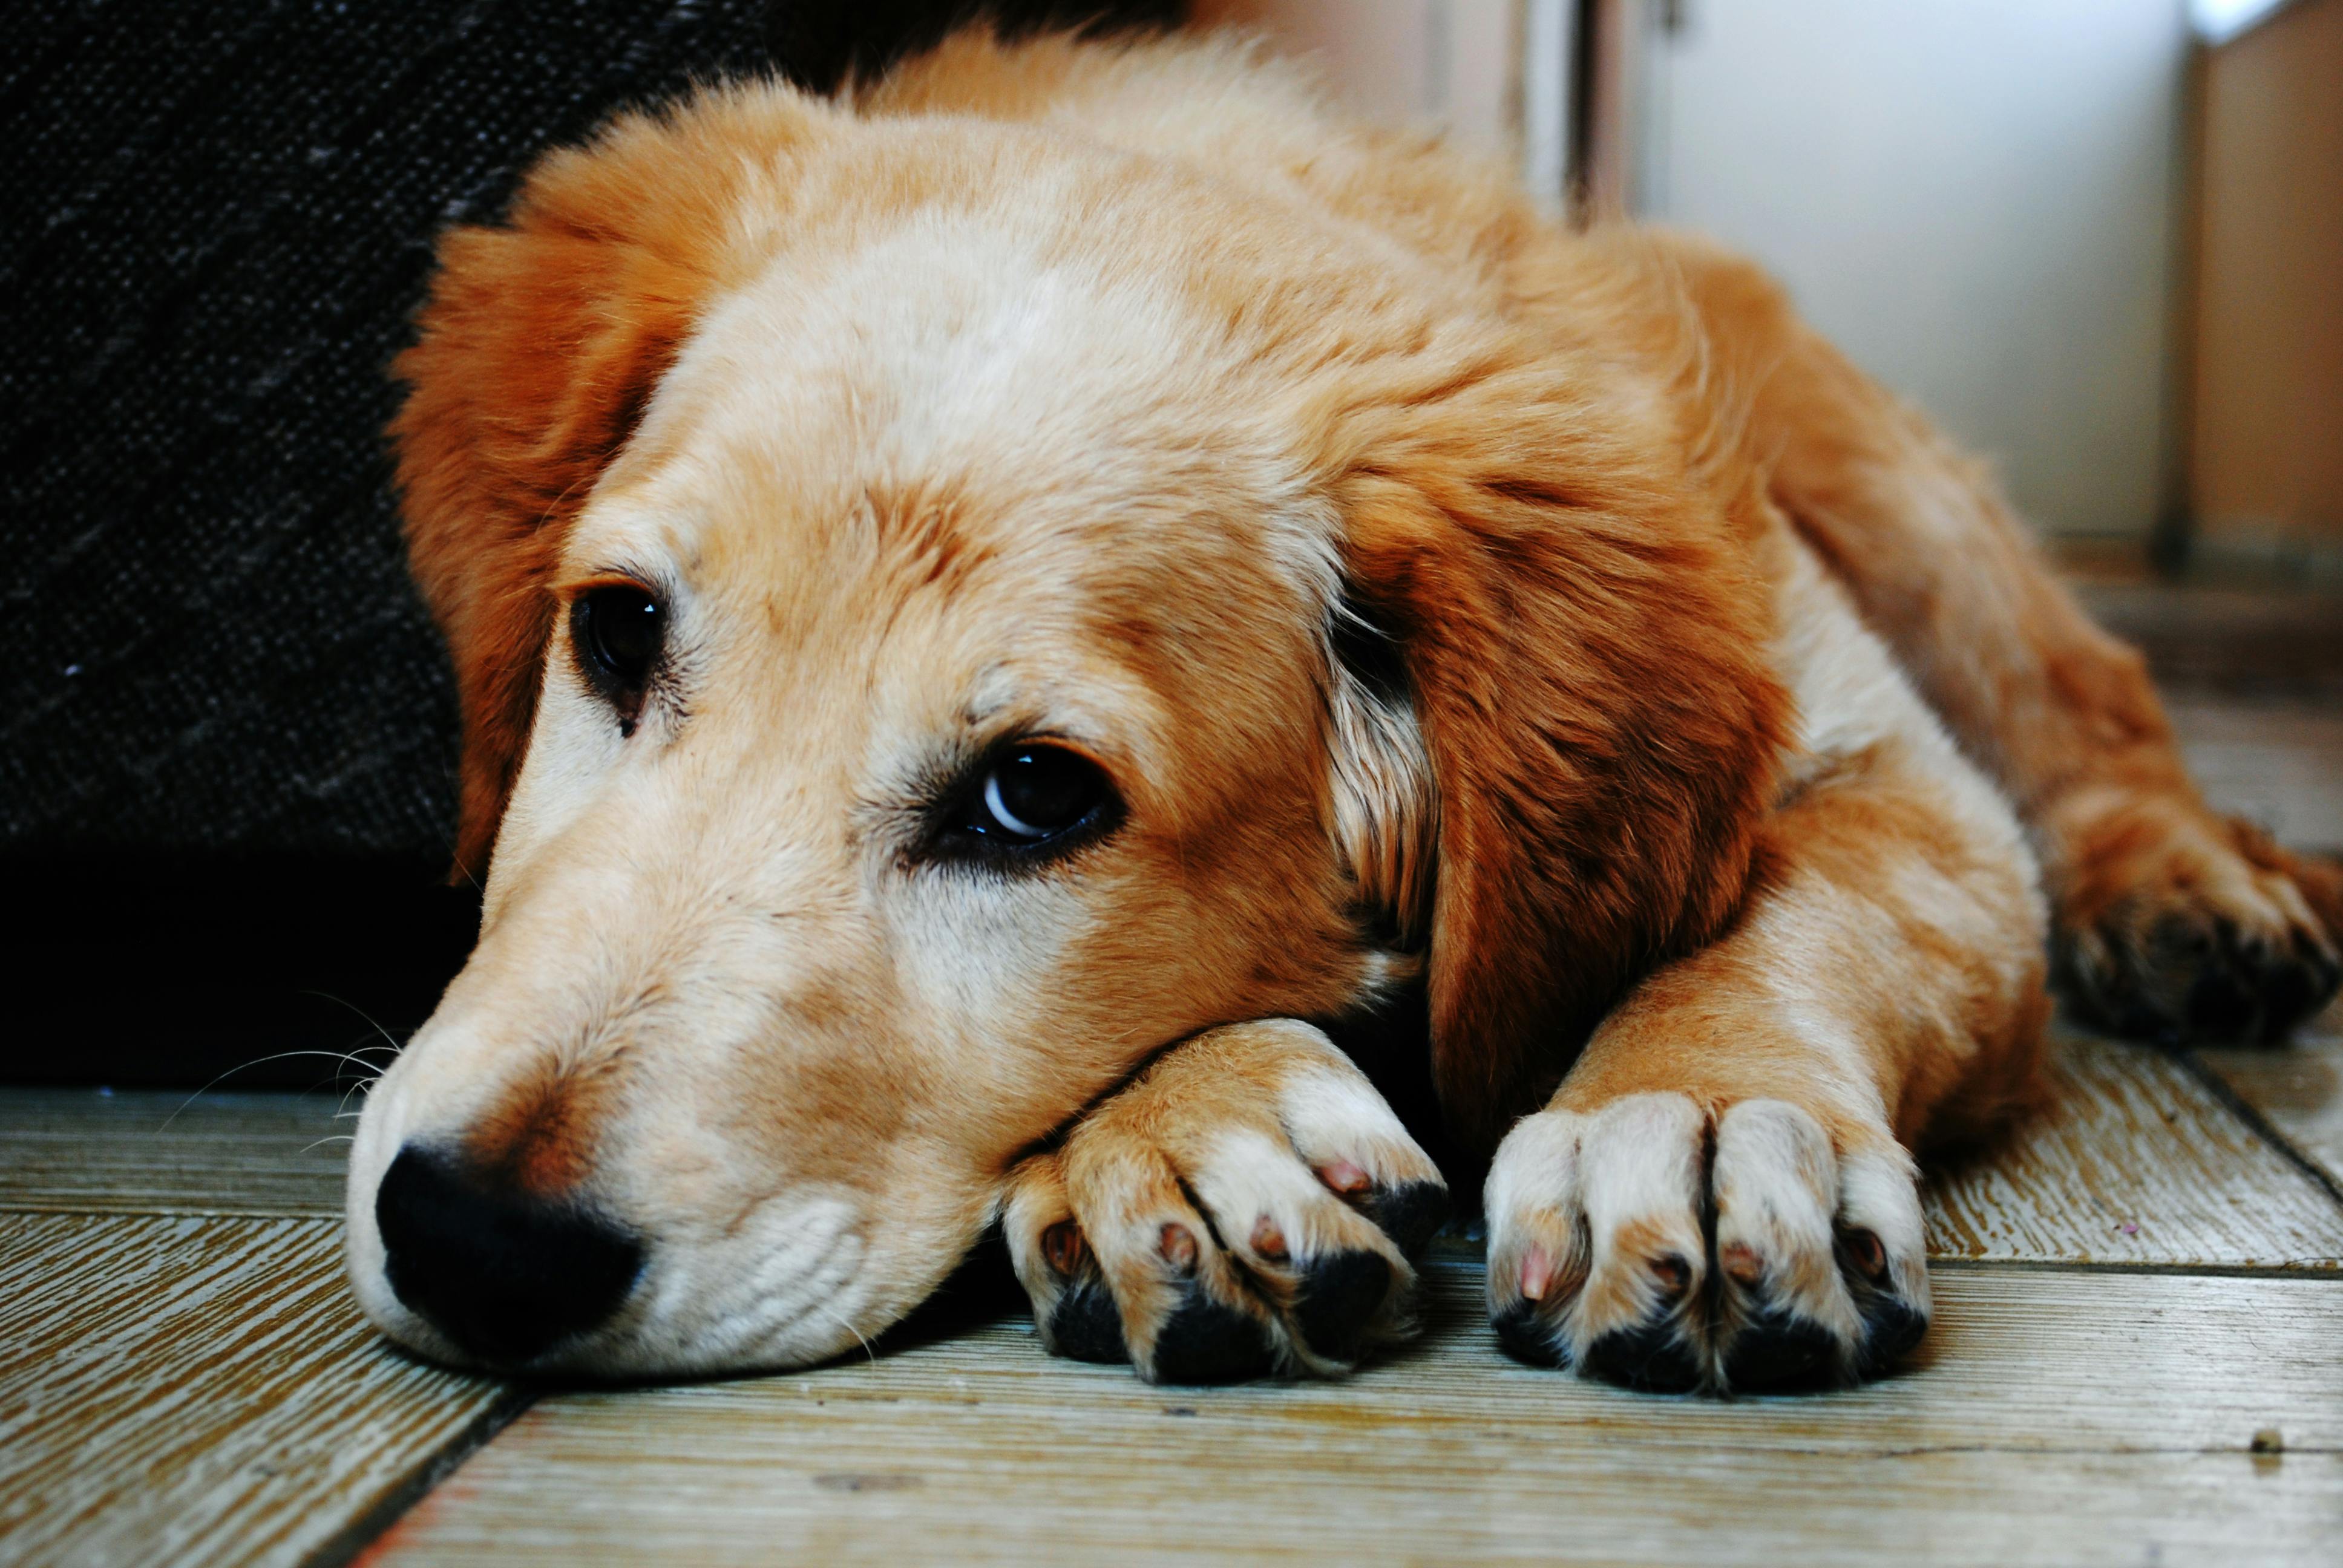 A dog resting on a wooden floor. | Photo: Pexels